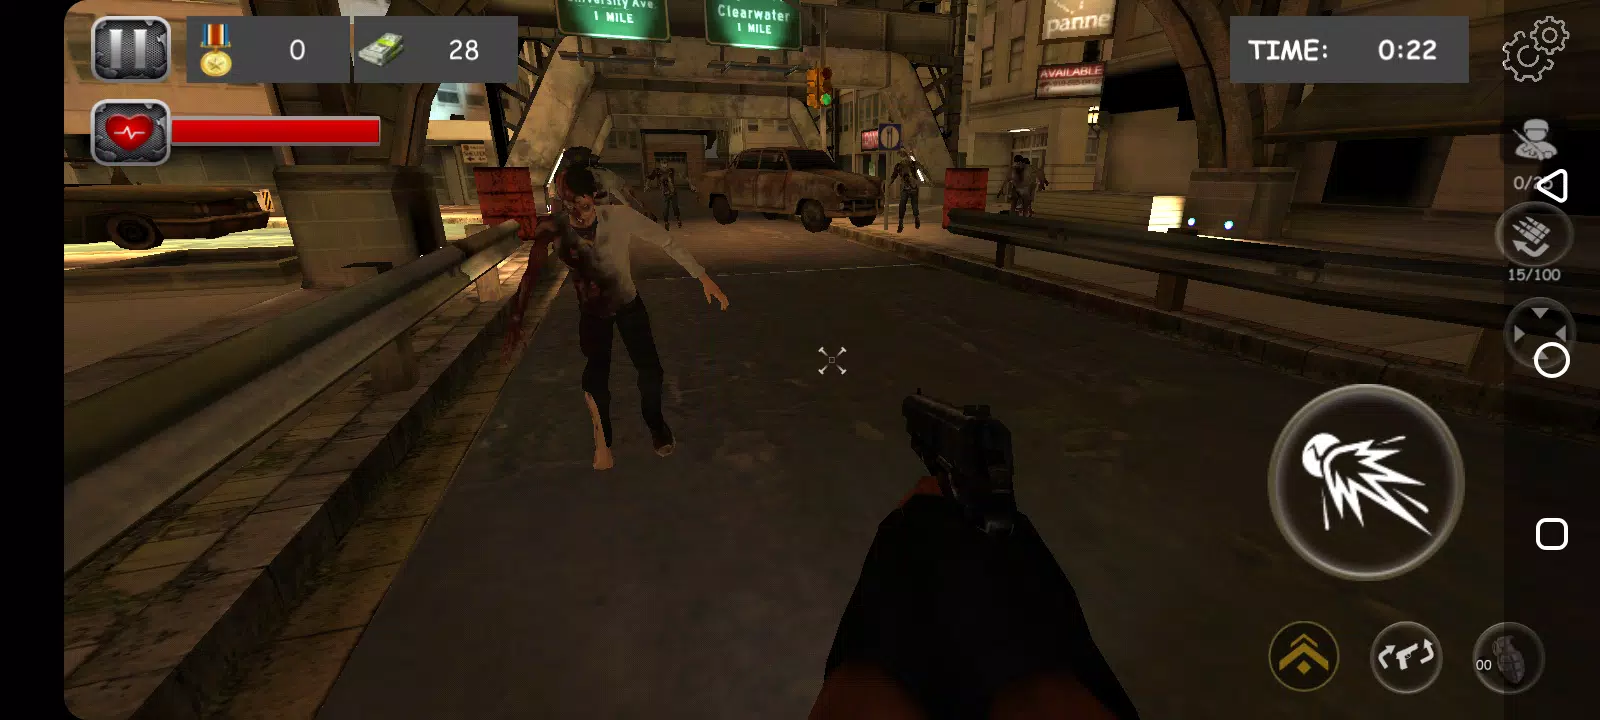 MAD ZOMBIES - Download do APK para Android